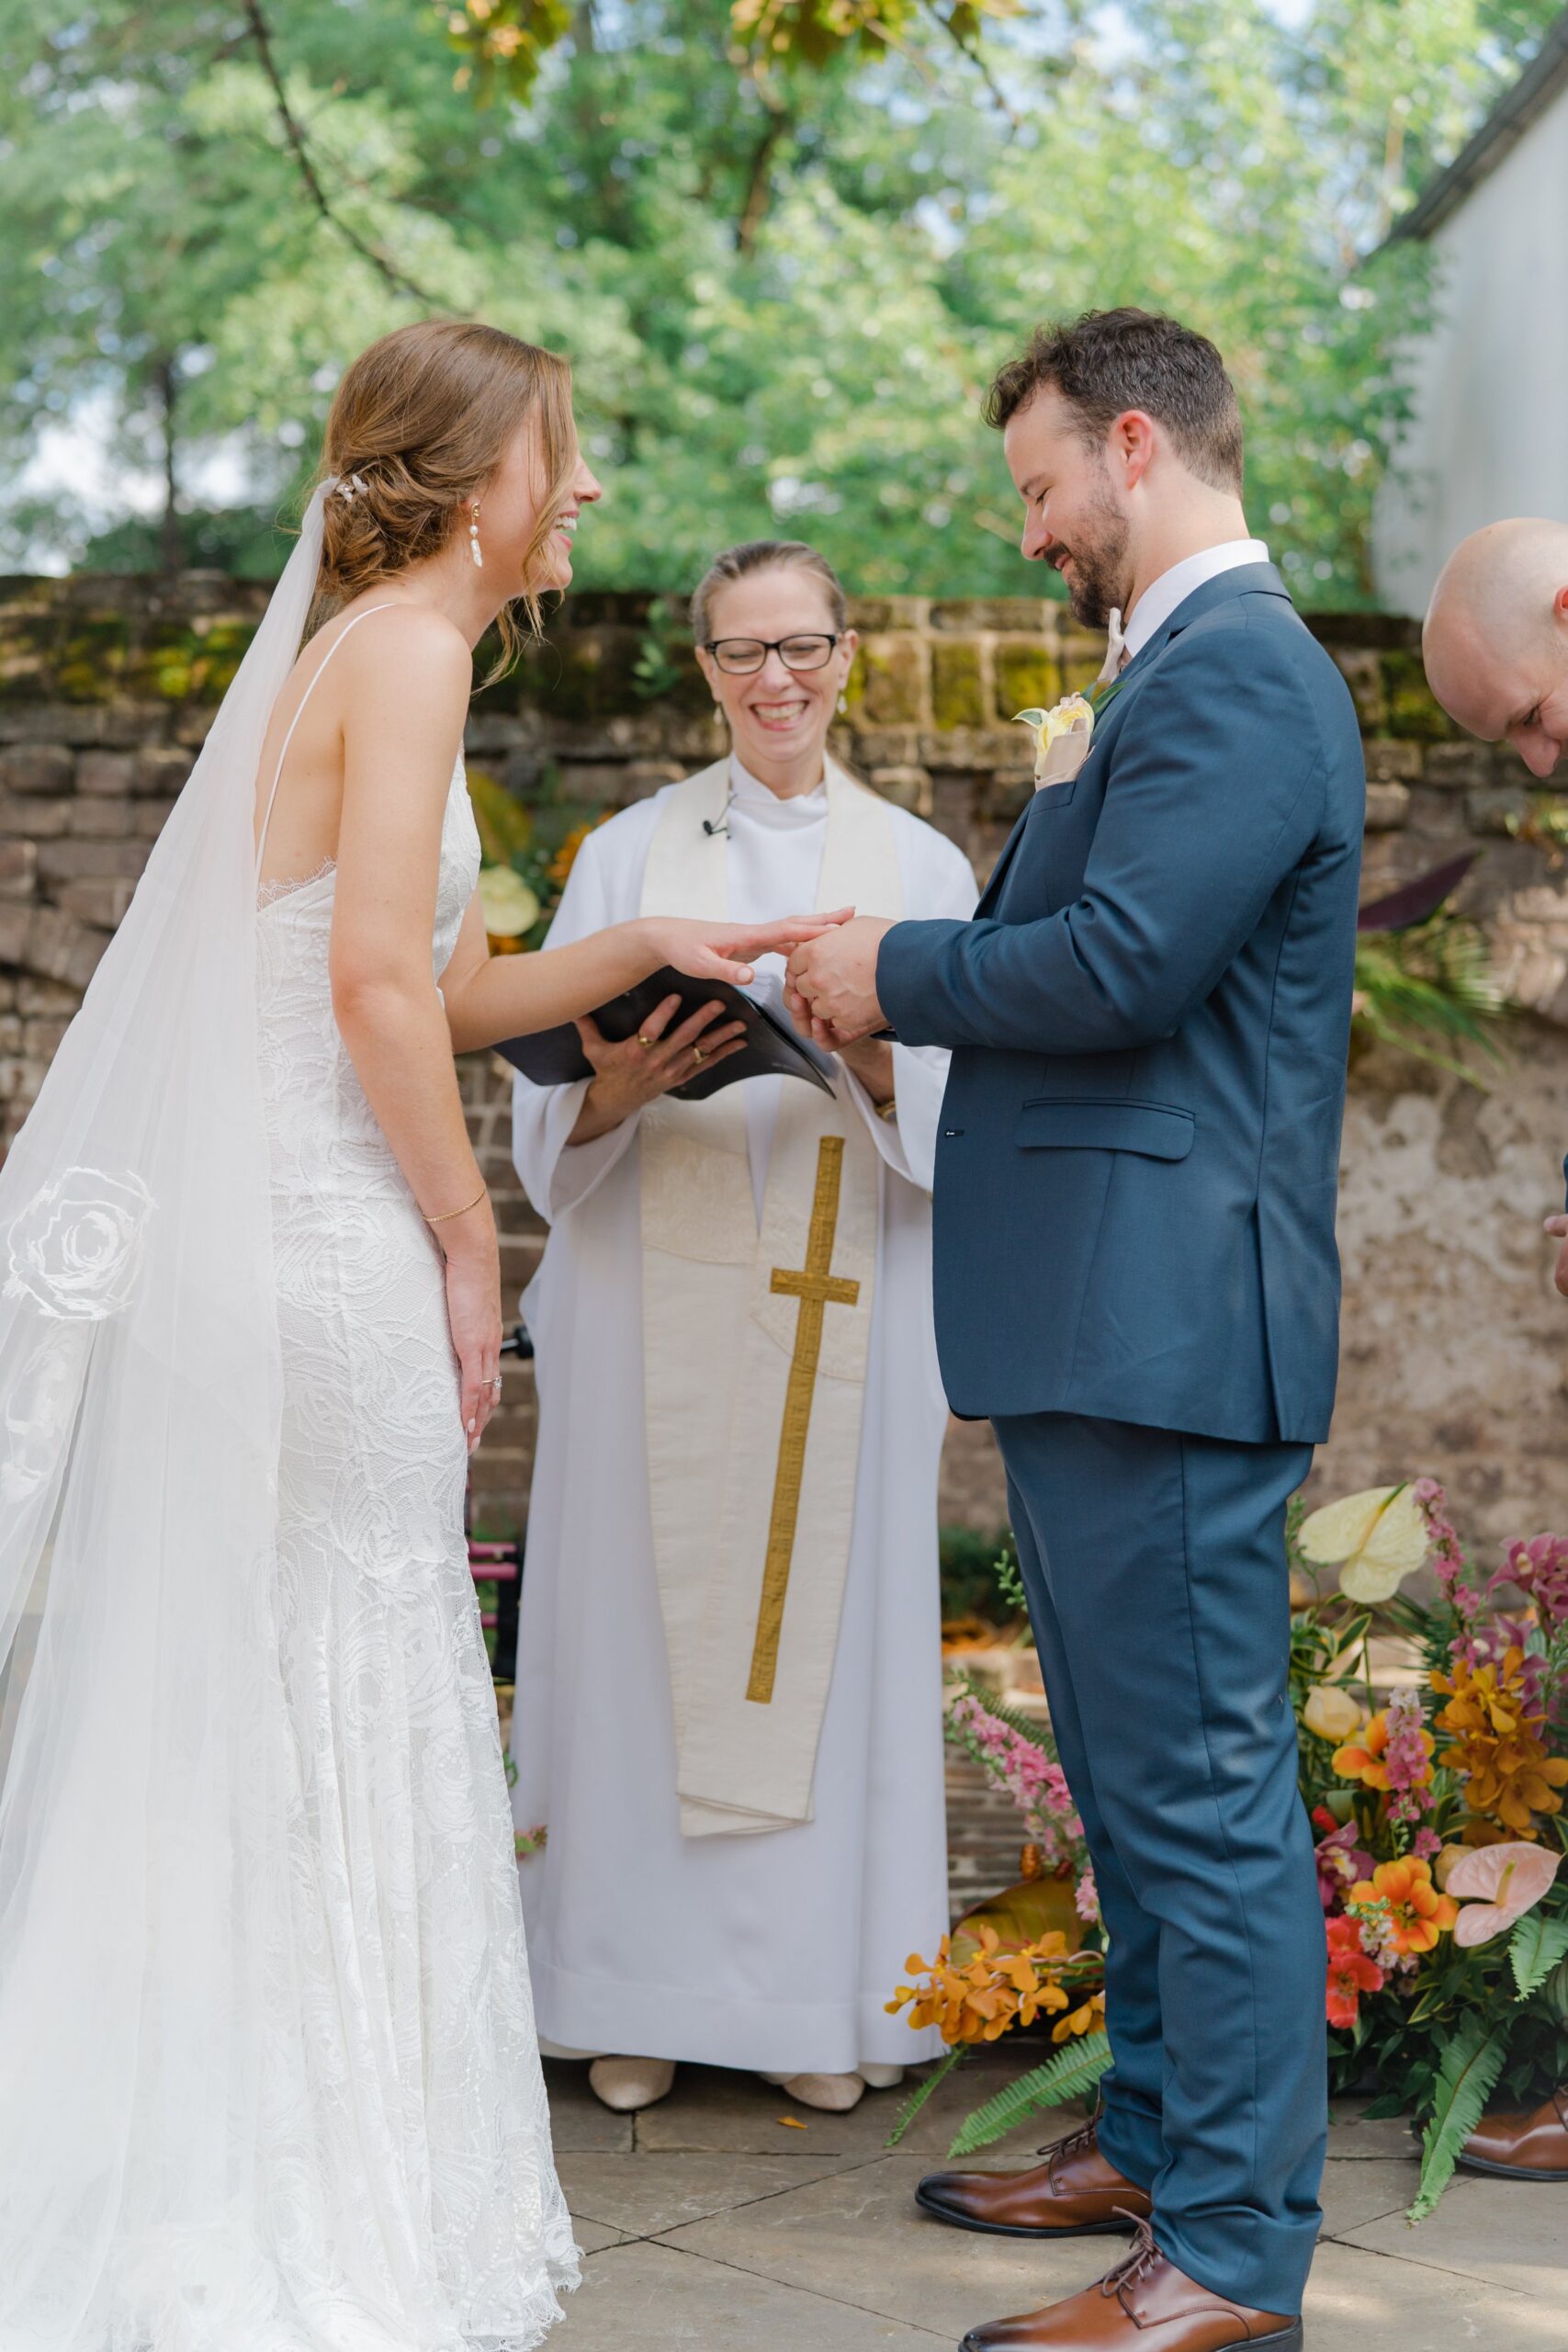 Groom puts ring on Bride during wedding ceremony.